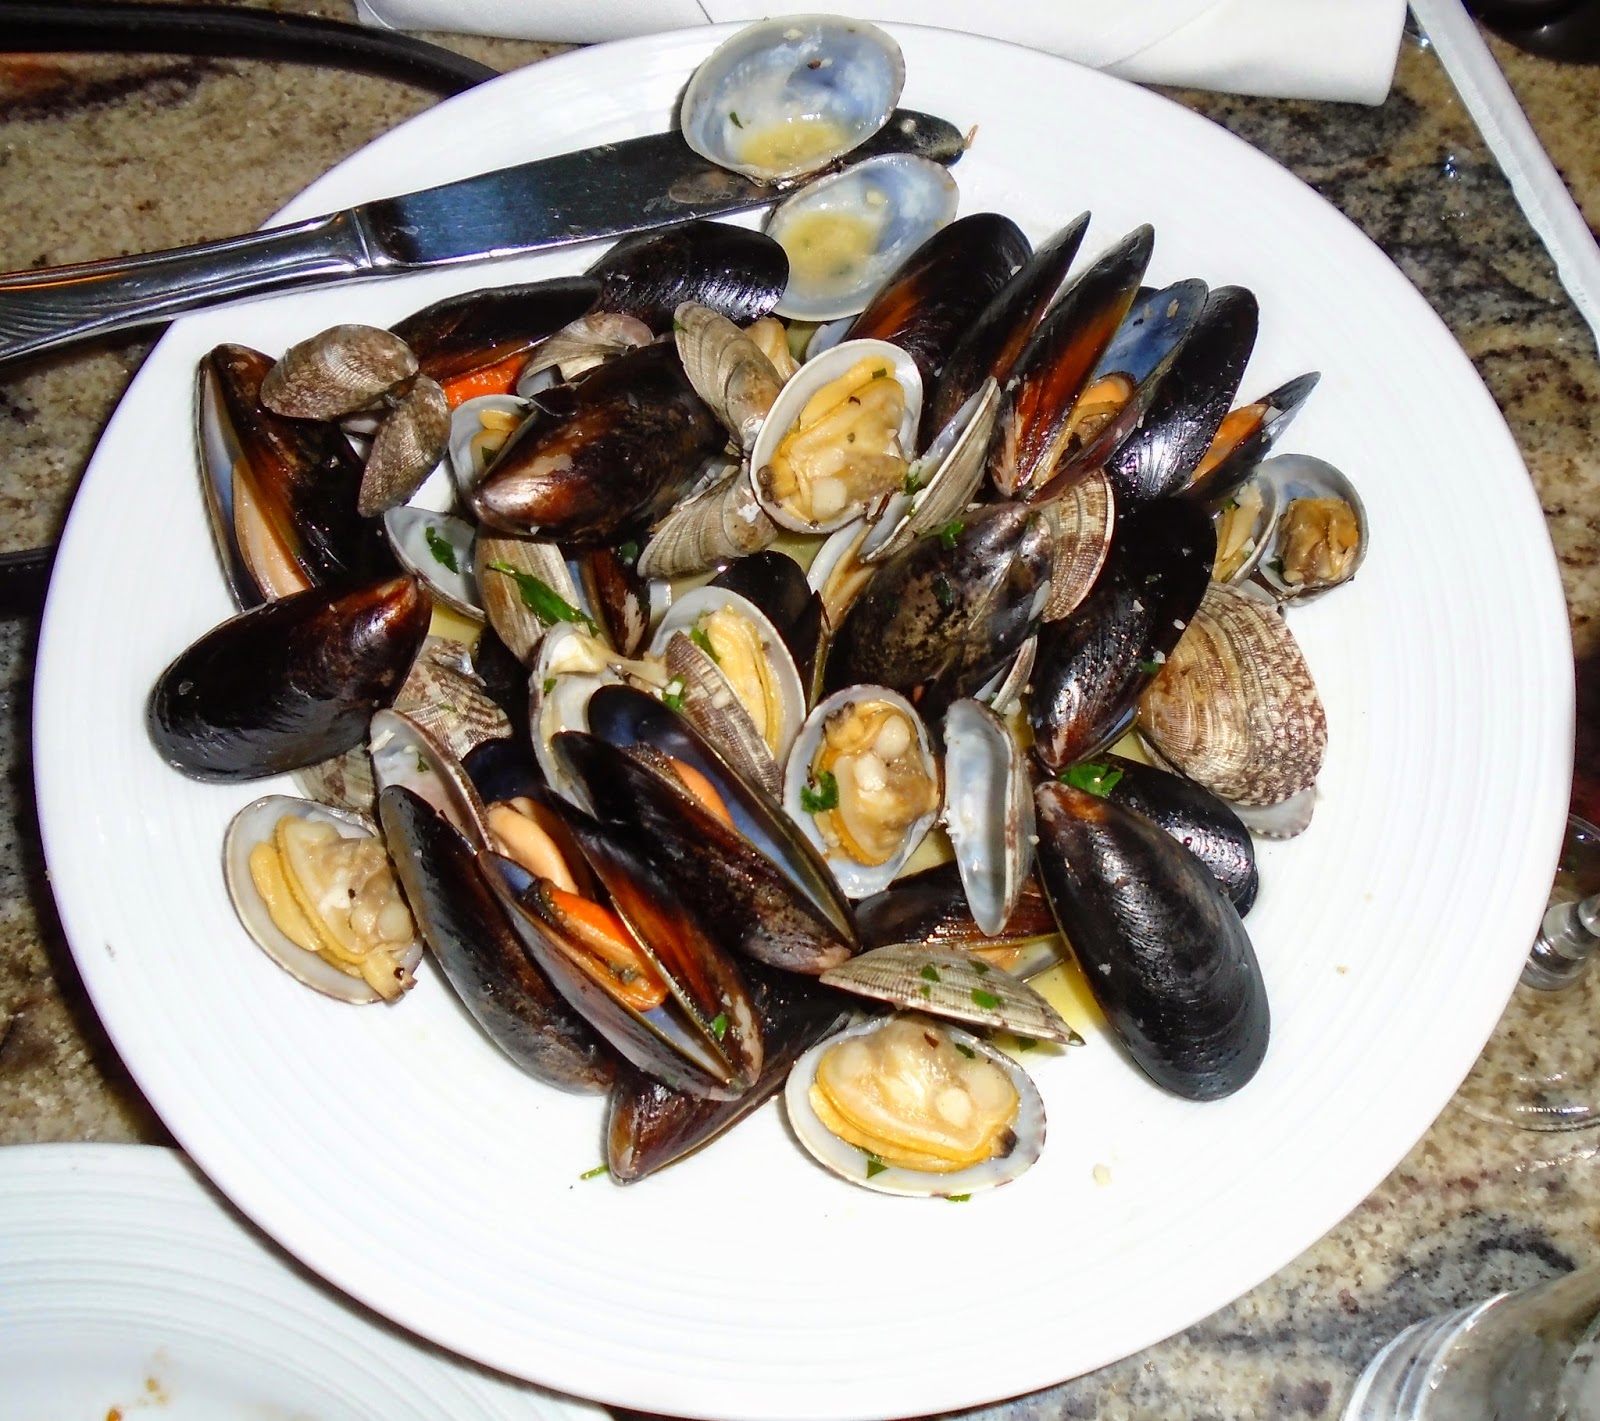 A close-up of the tender, juicy mussels and clams